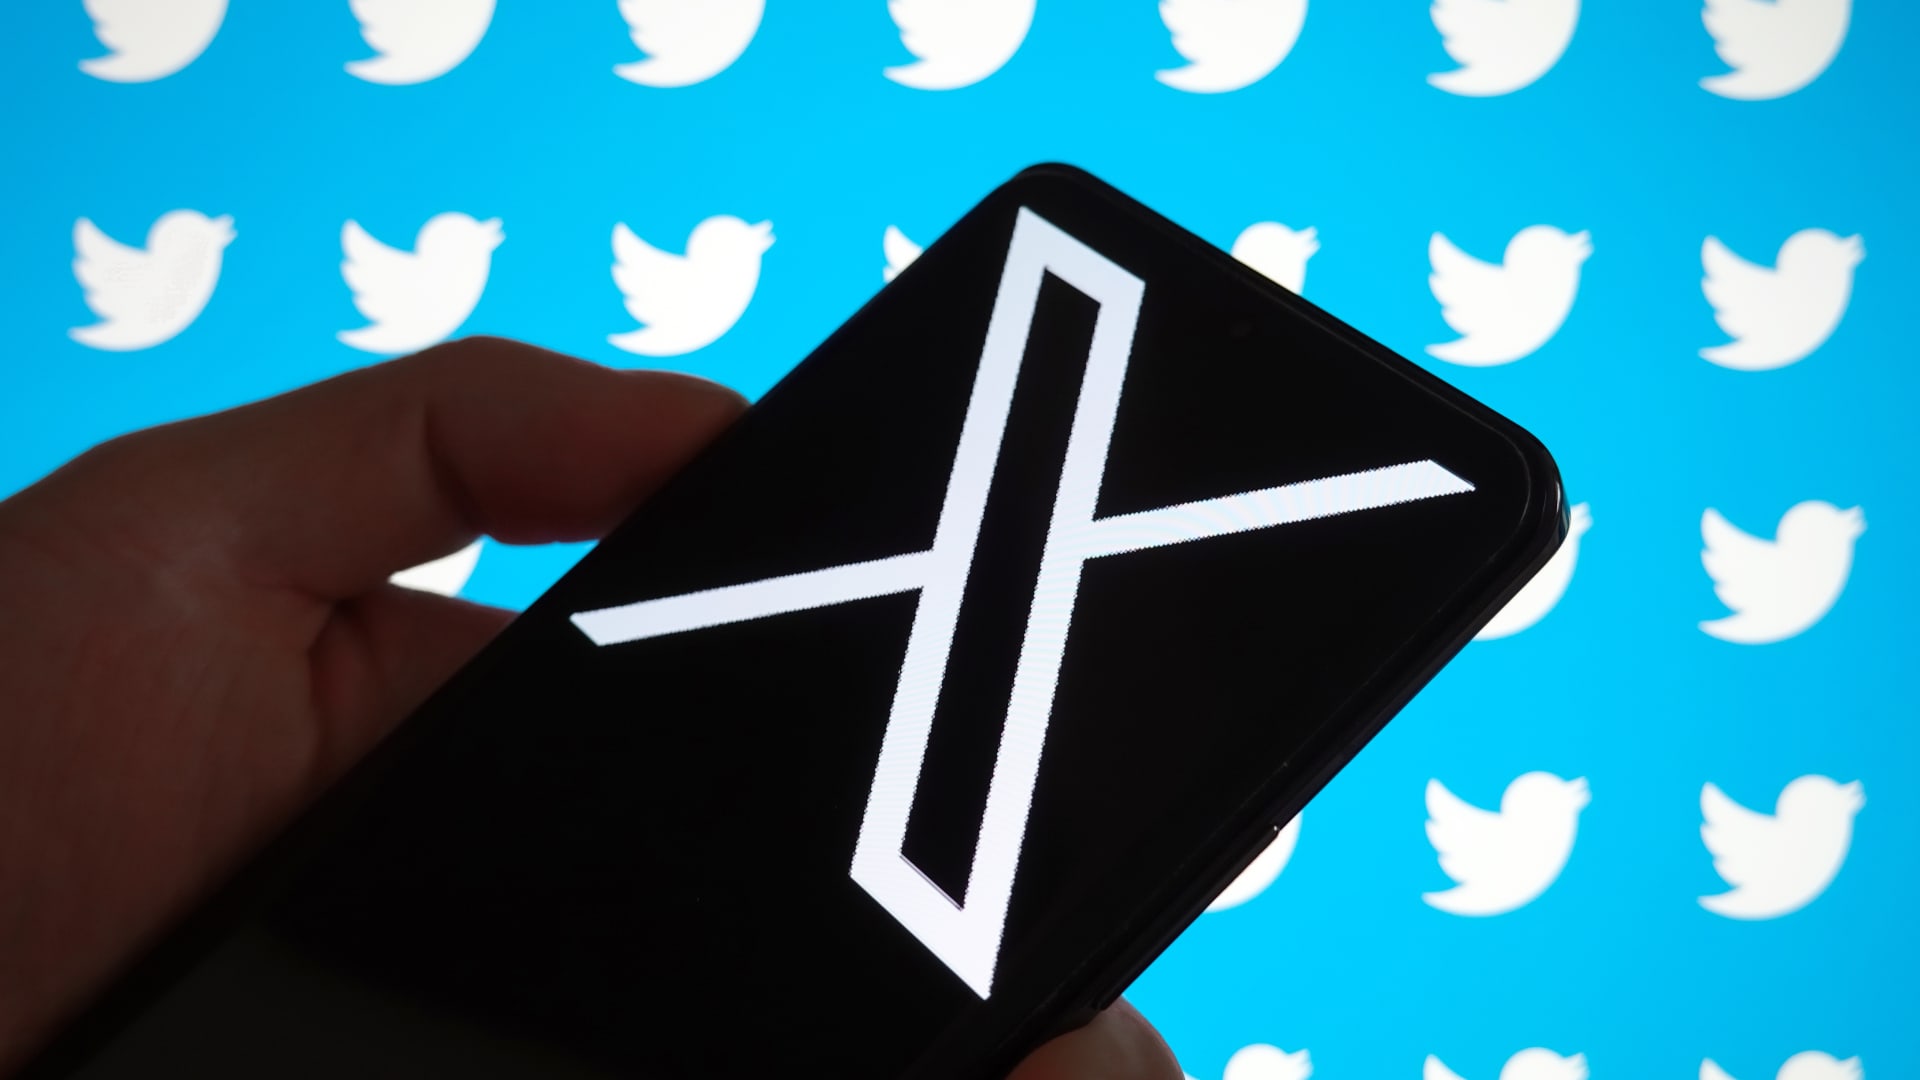 Read Twitter CEO Linda Yaccarino’s message to staff about the ‘X’ rebrand